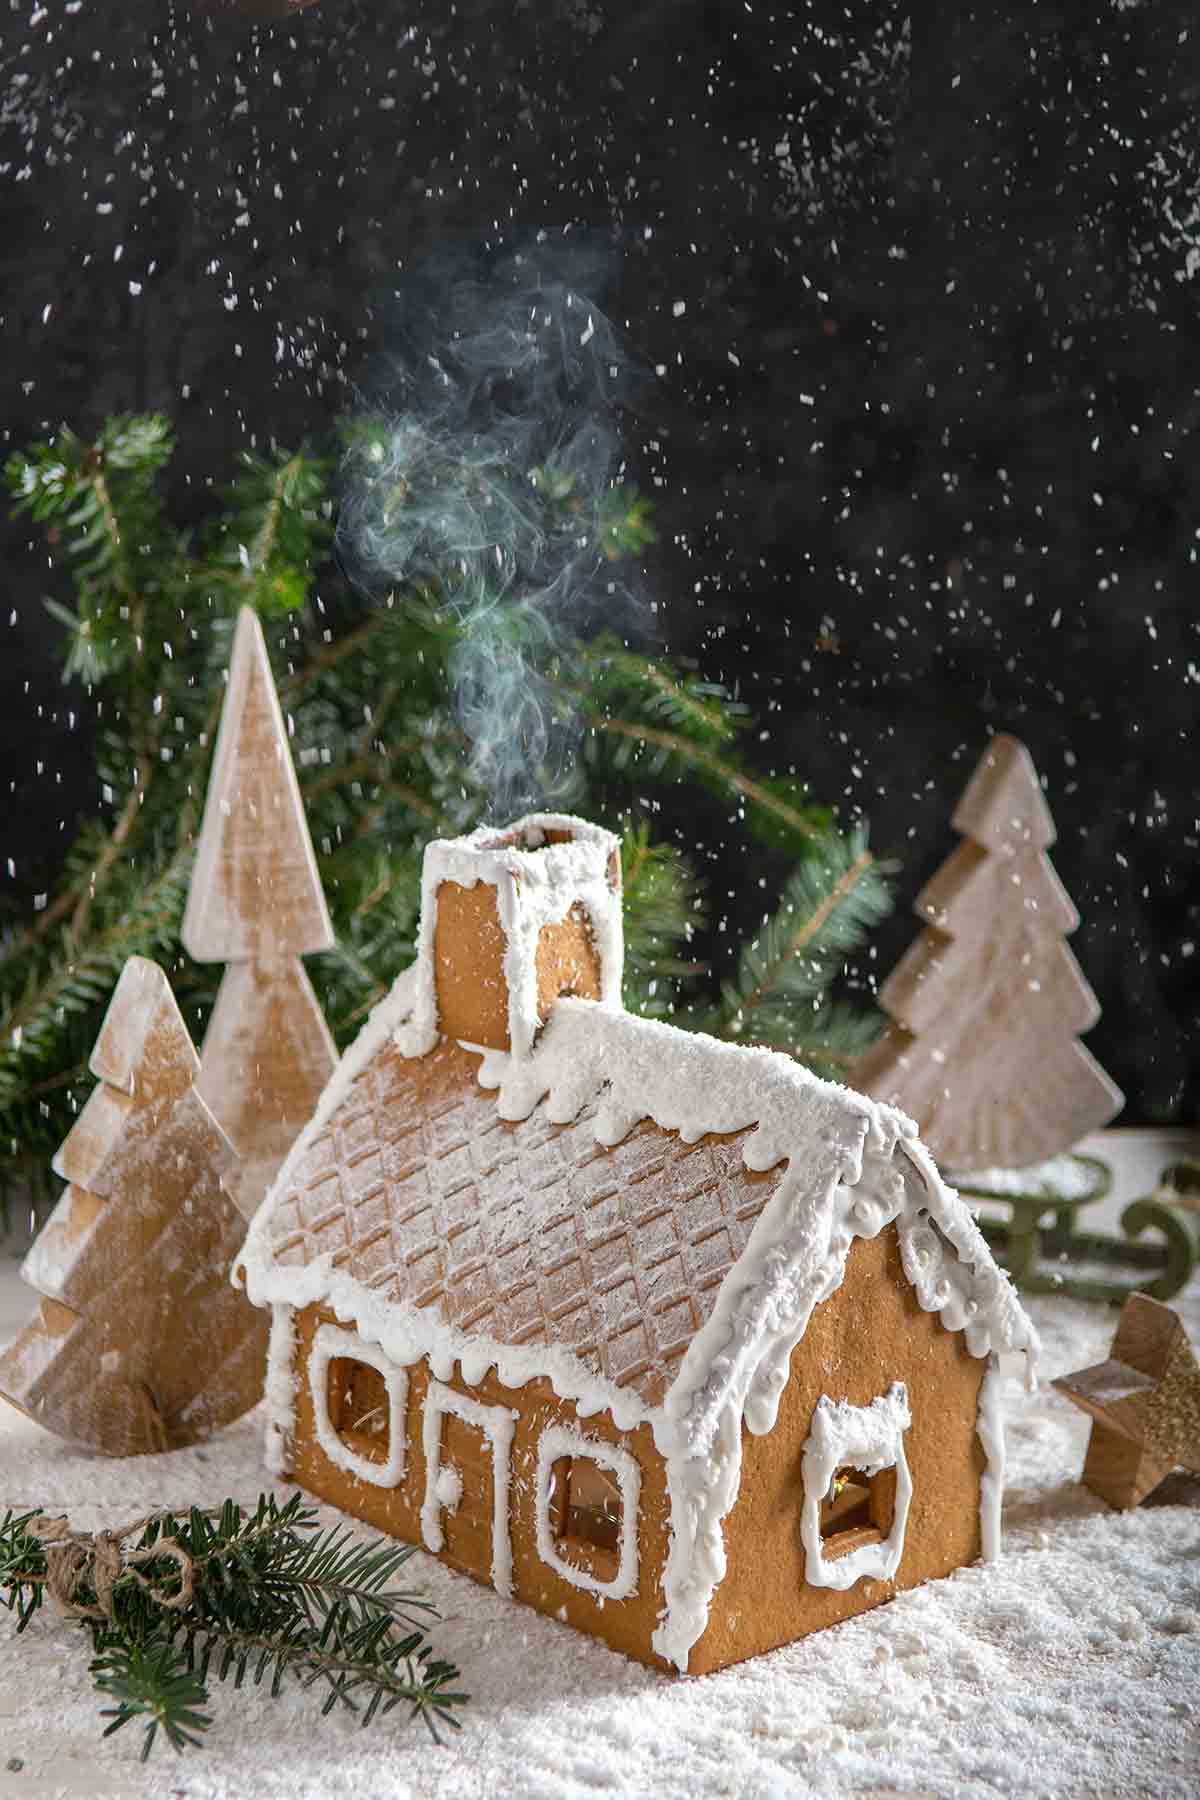 Edible House With Icing Sugar Snow Falling On Top